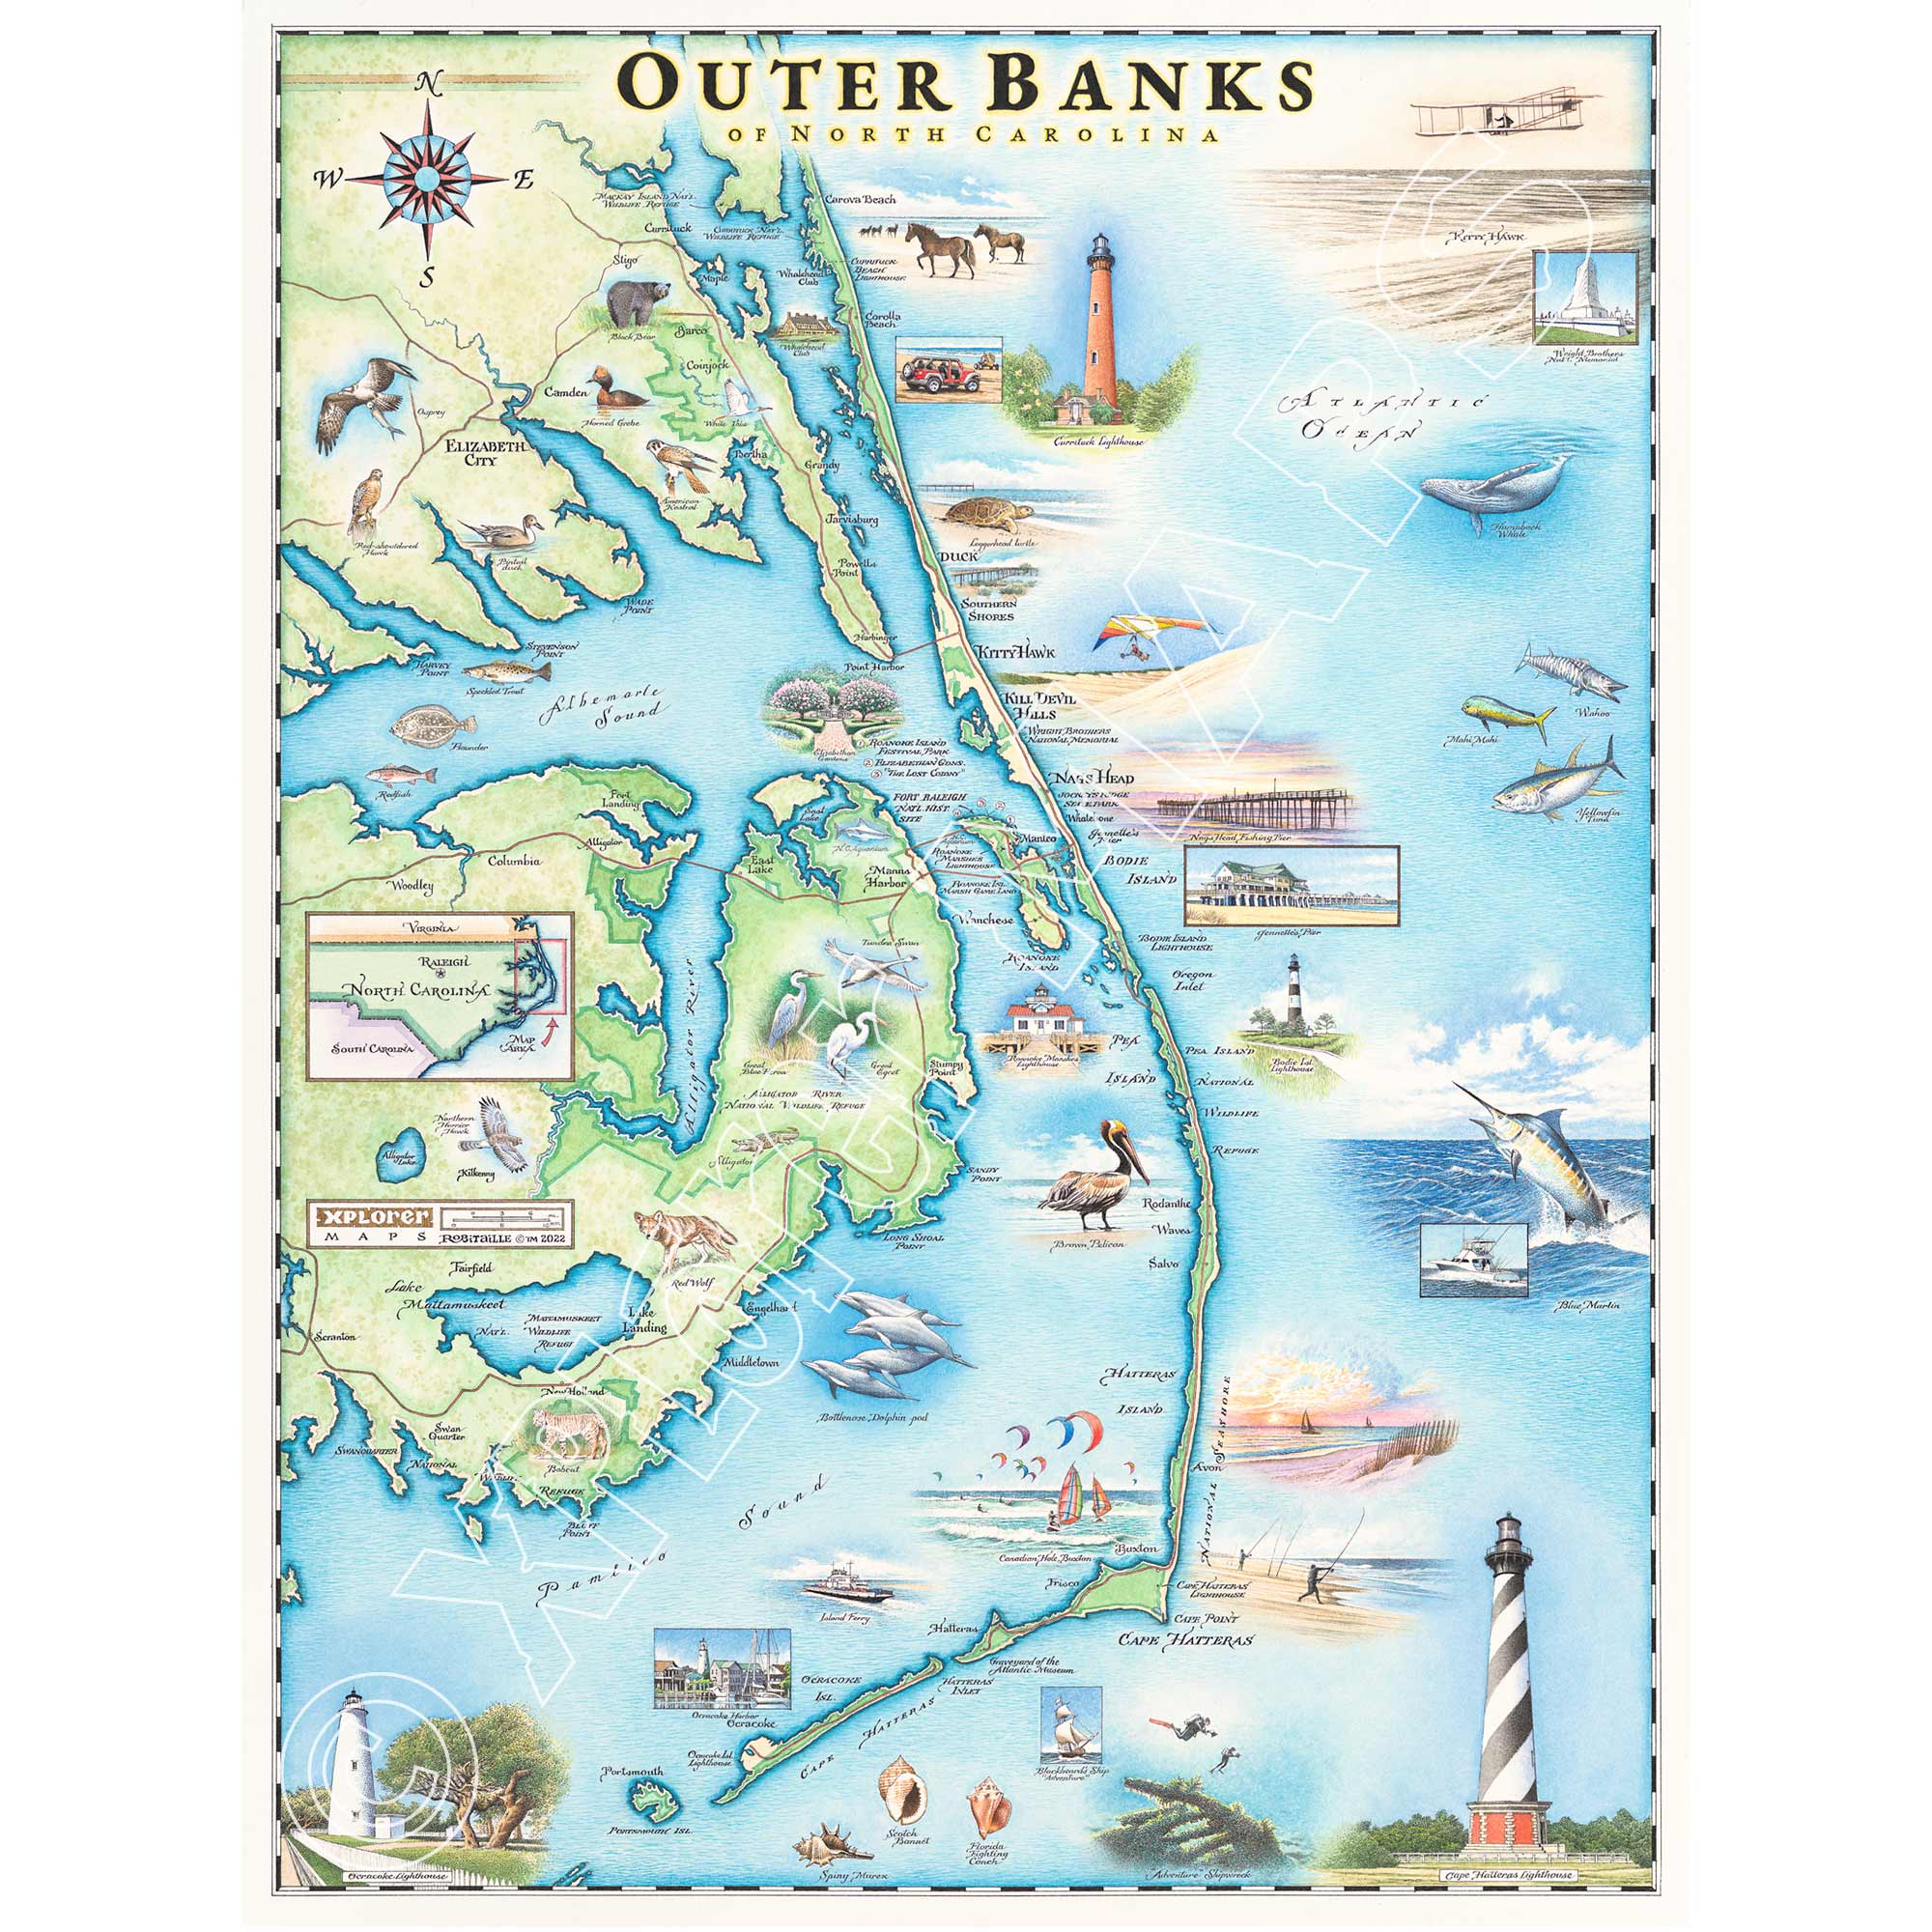 Hand-drawn map of North Carolina's Outer Banks (OBX) in earth tones, blues, and greens. The print showcases coastal elements, including beaches, lighthouses, the Graveyard of the Atlantic Museum, ships, islands, seabirds, fish, sailboats, a Blue Marlin, turtle, bear, and wild horses on Corolla Beach.